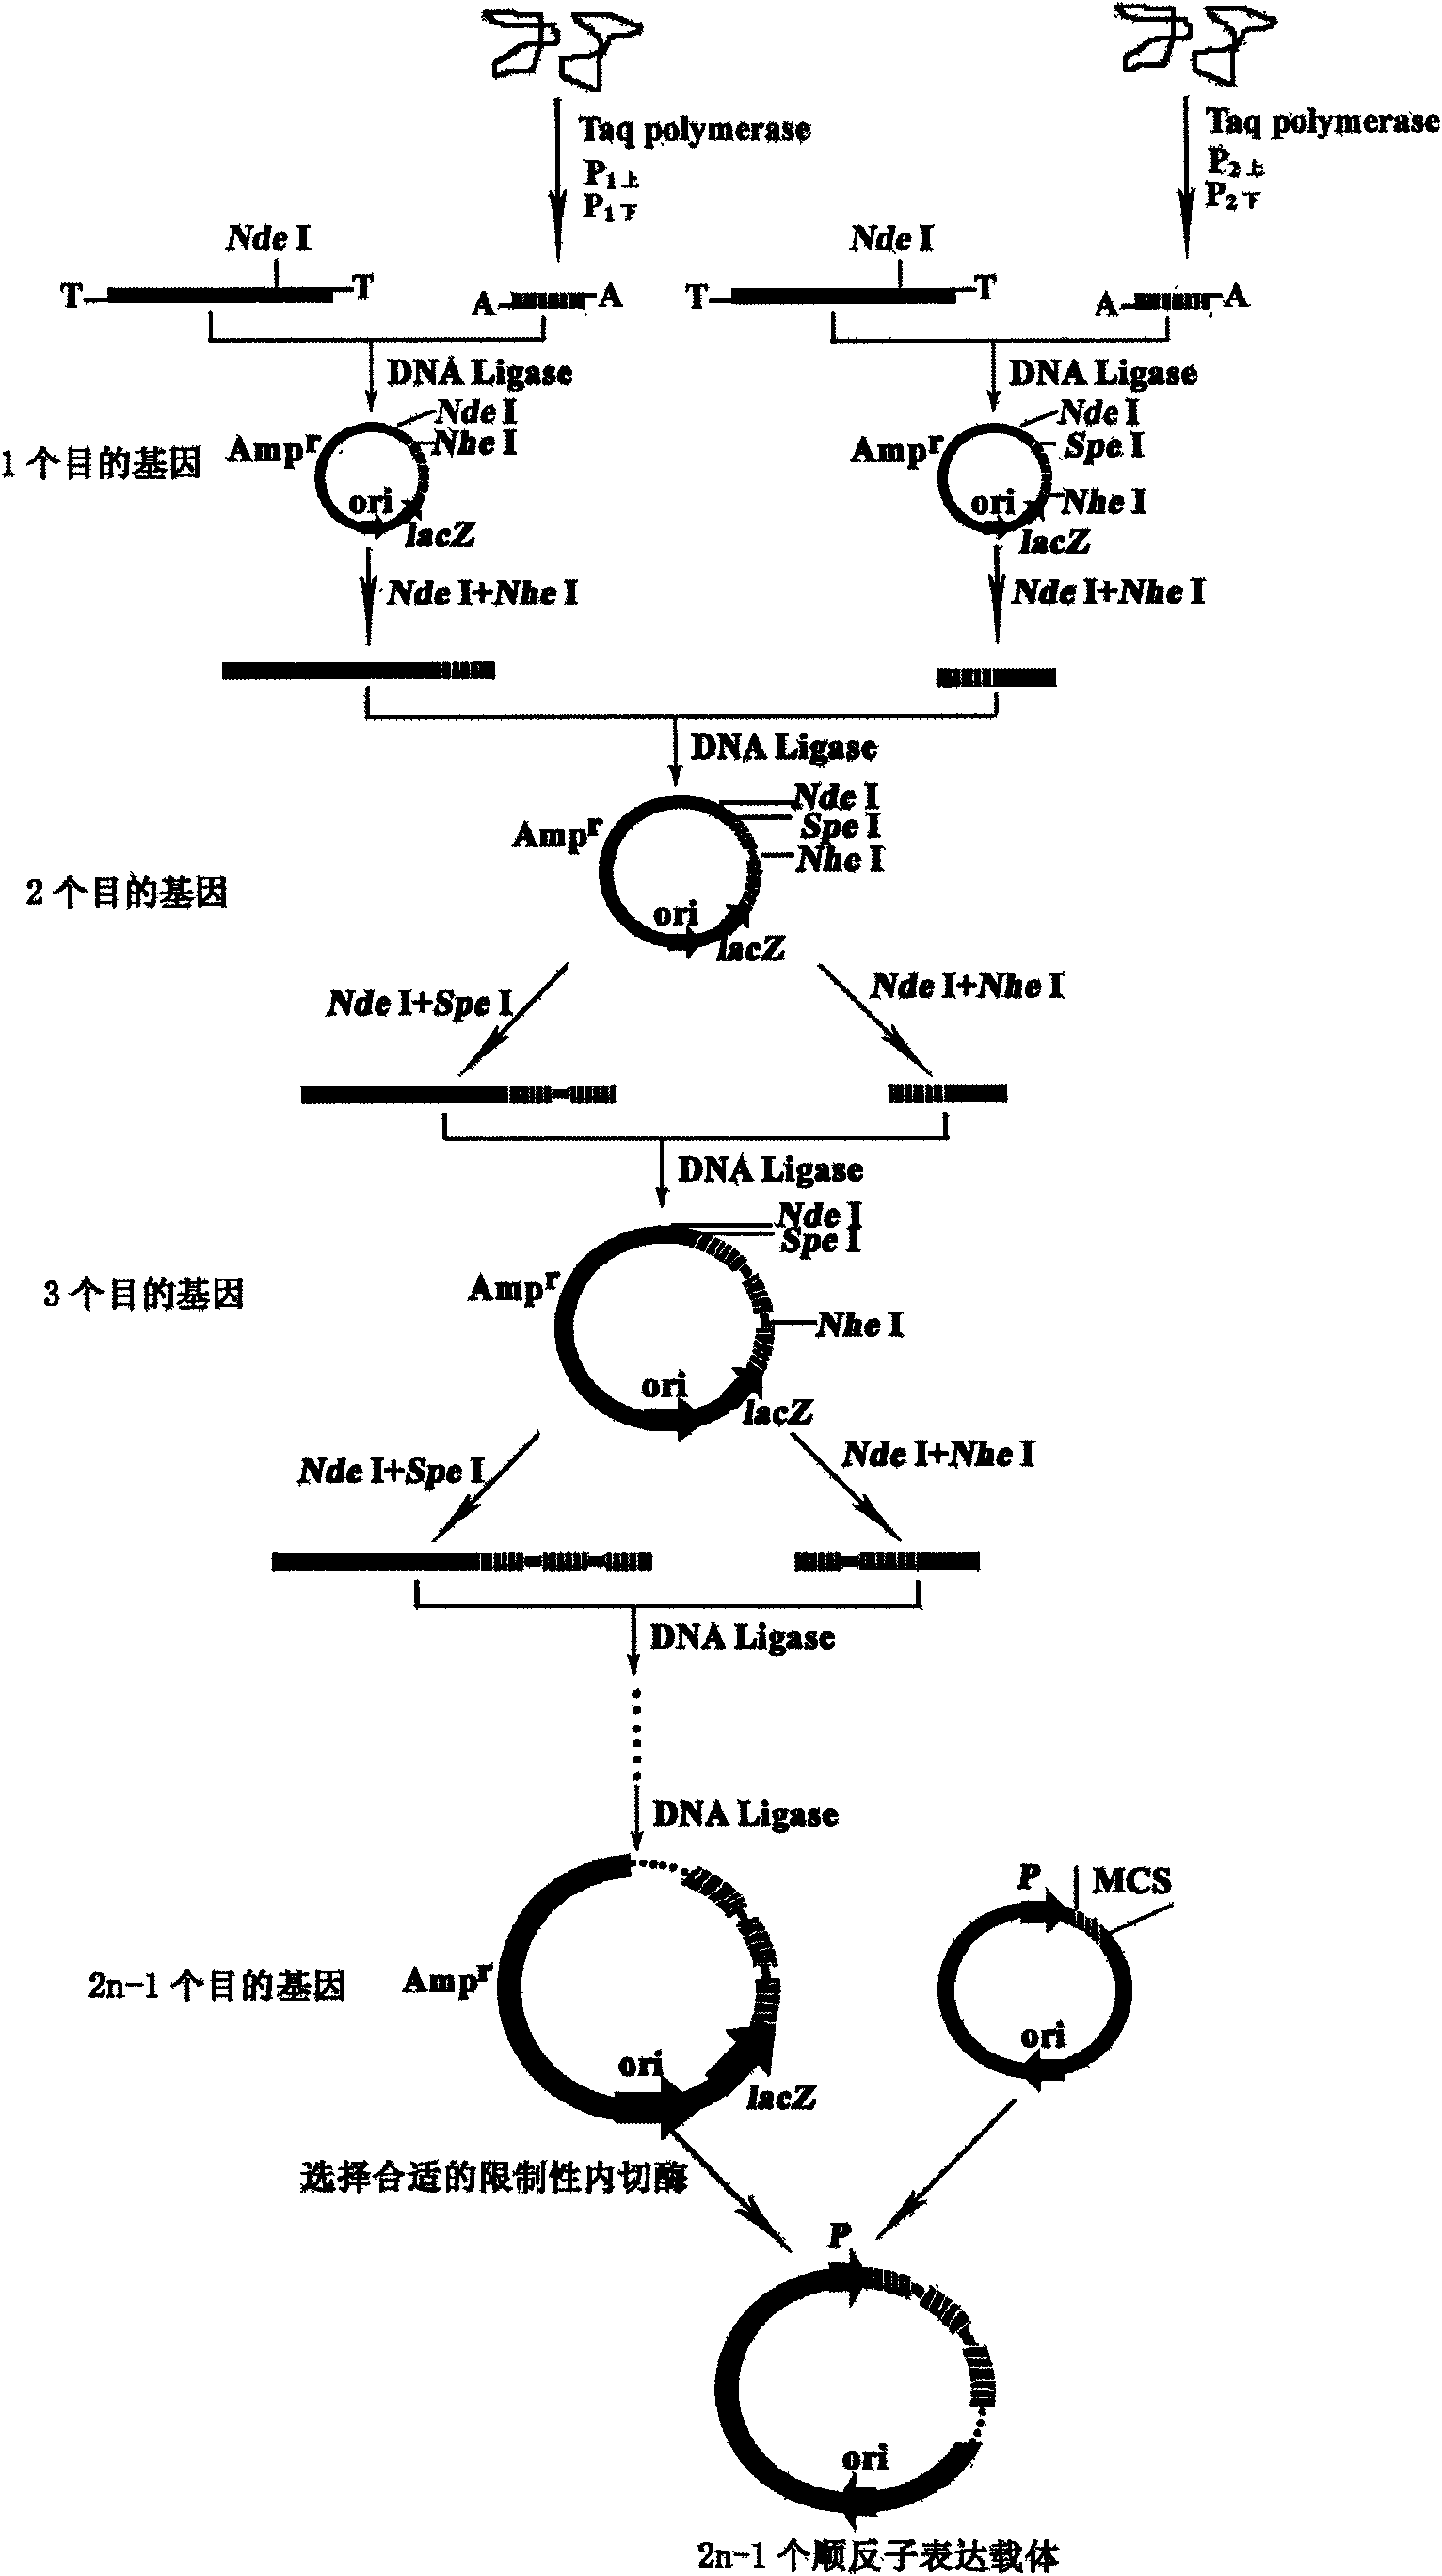 Construction method of polycistron expression vector